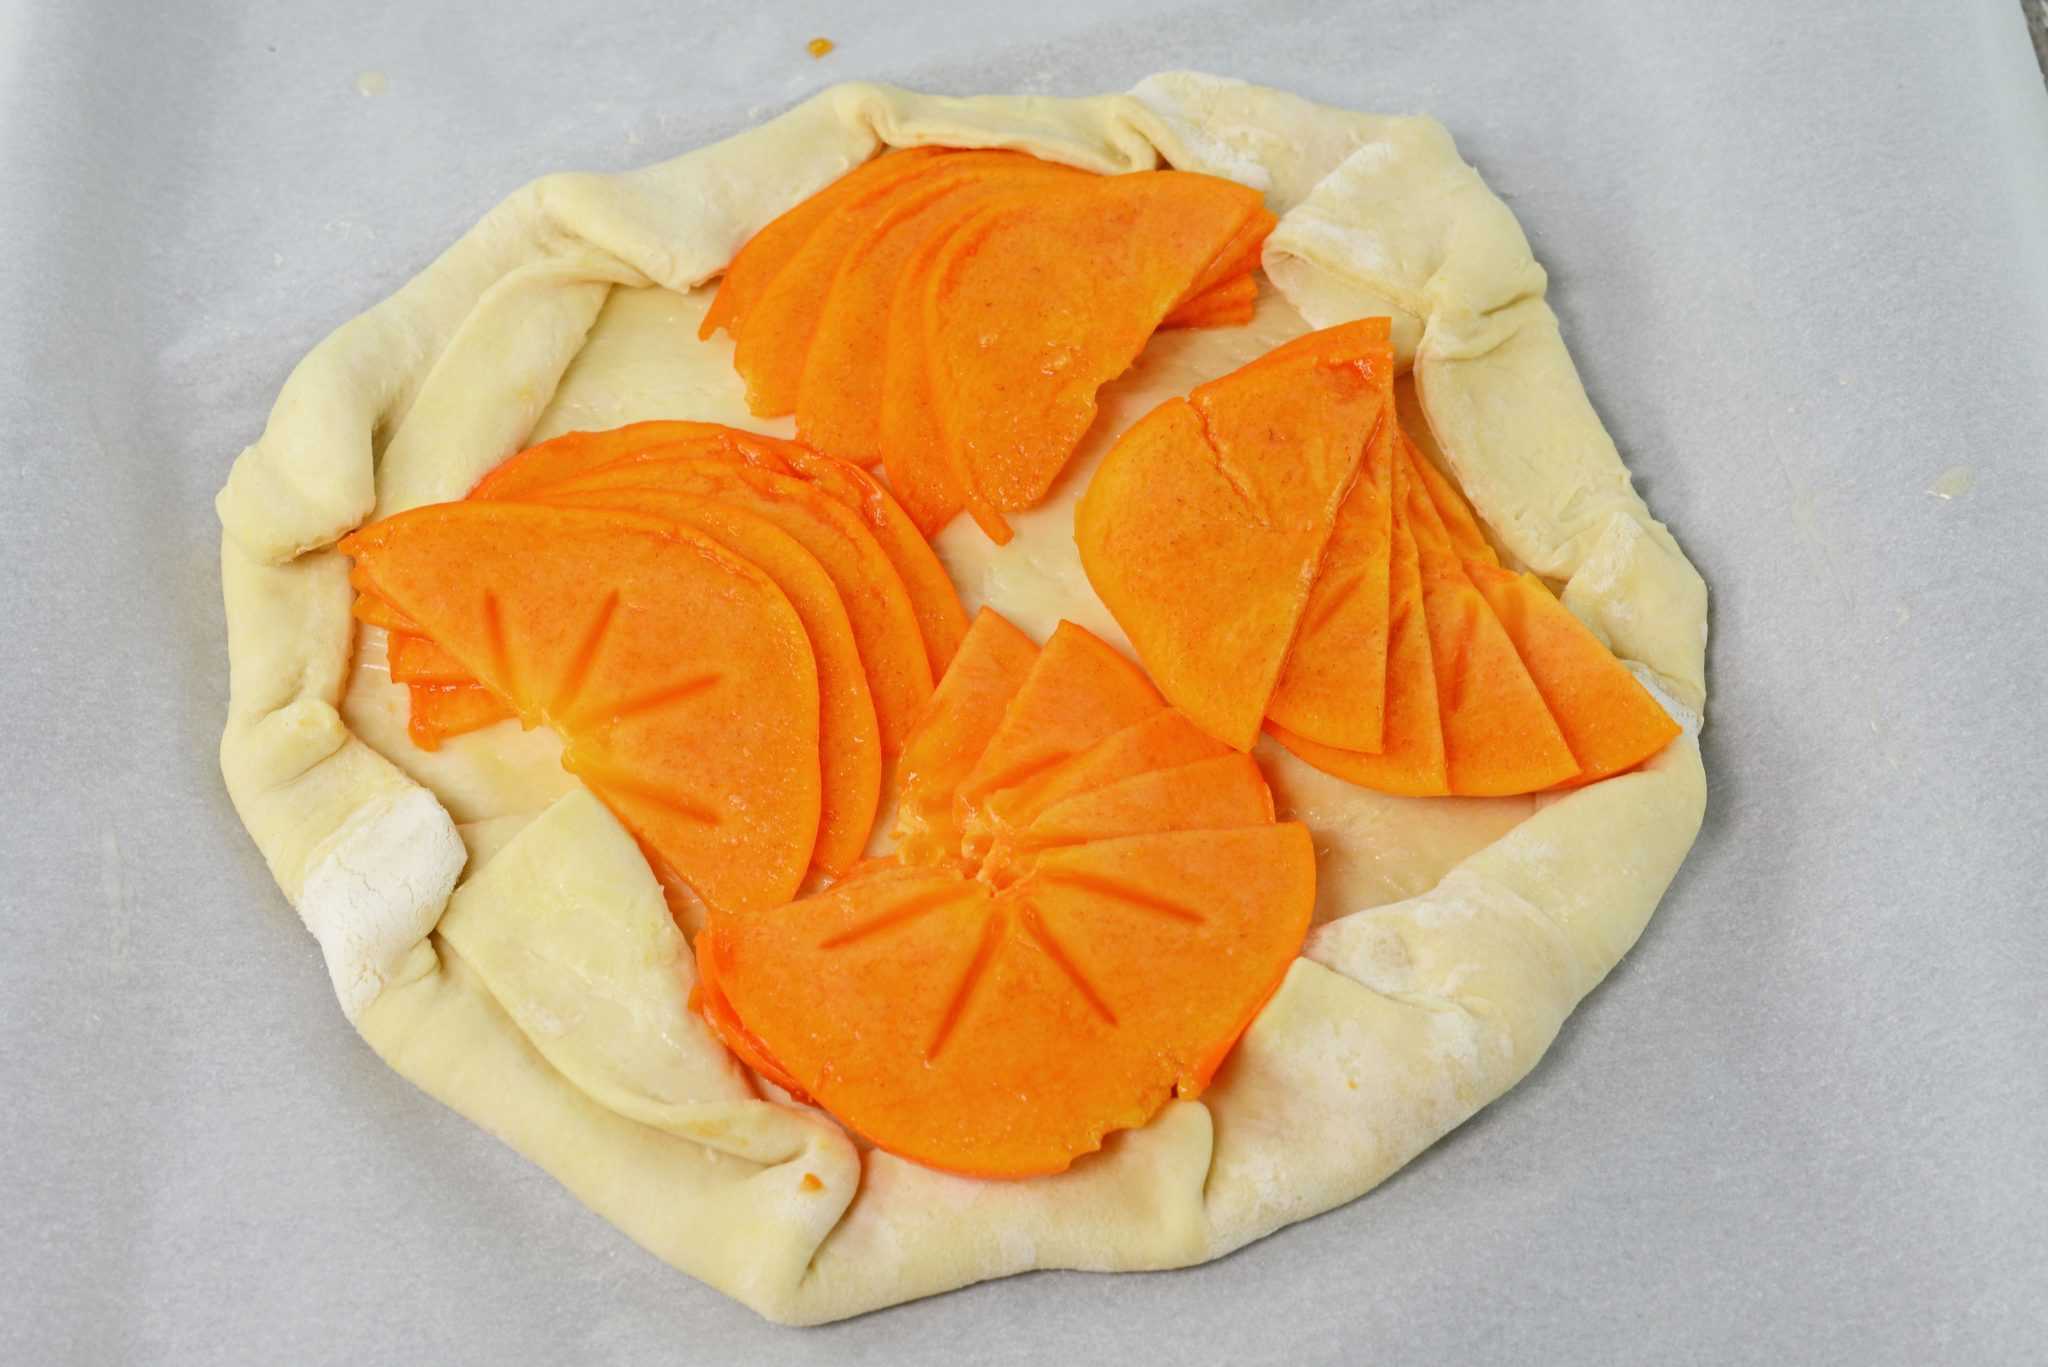 A Persimmon Tart is an easy dessert or breakfast recipe using bright orange persimmon, brown sugar and buttery puff pastry.